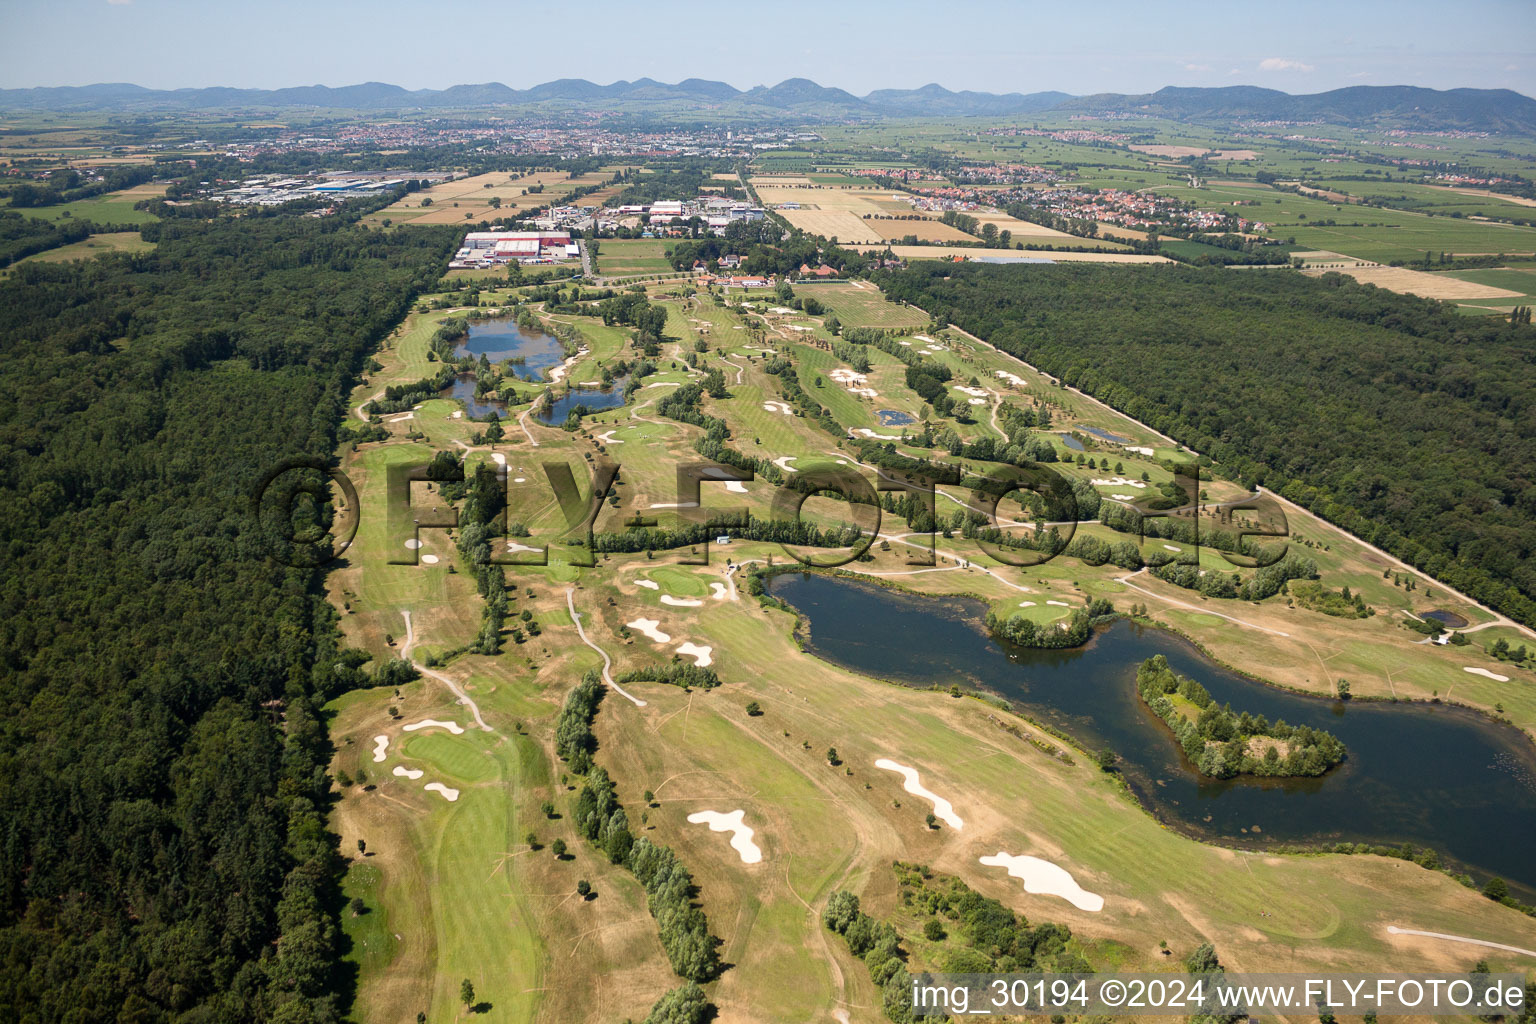 Aerial view of Grounds of the Golf course at Golfanlage Landgut Dreihof in Essingen in the state Rhineland-Palatinate